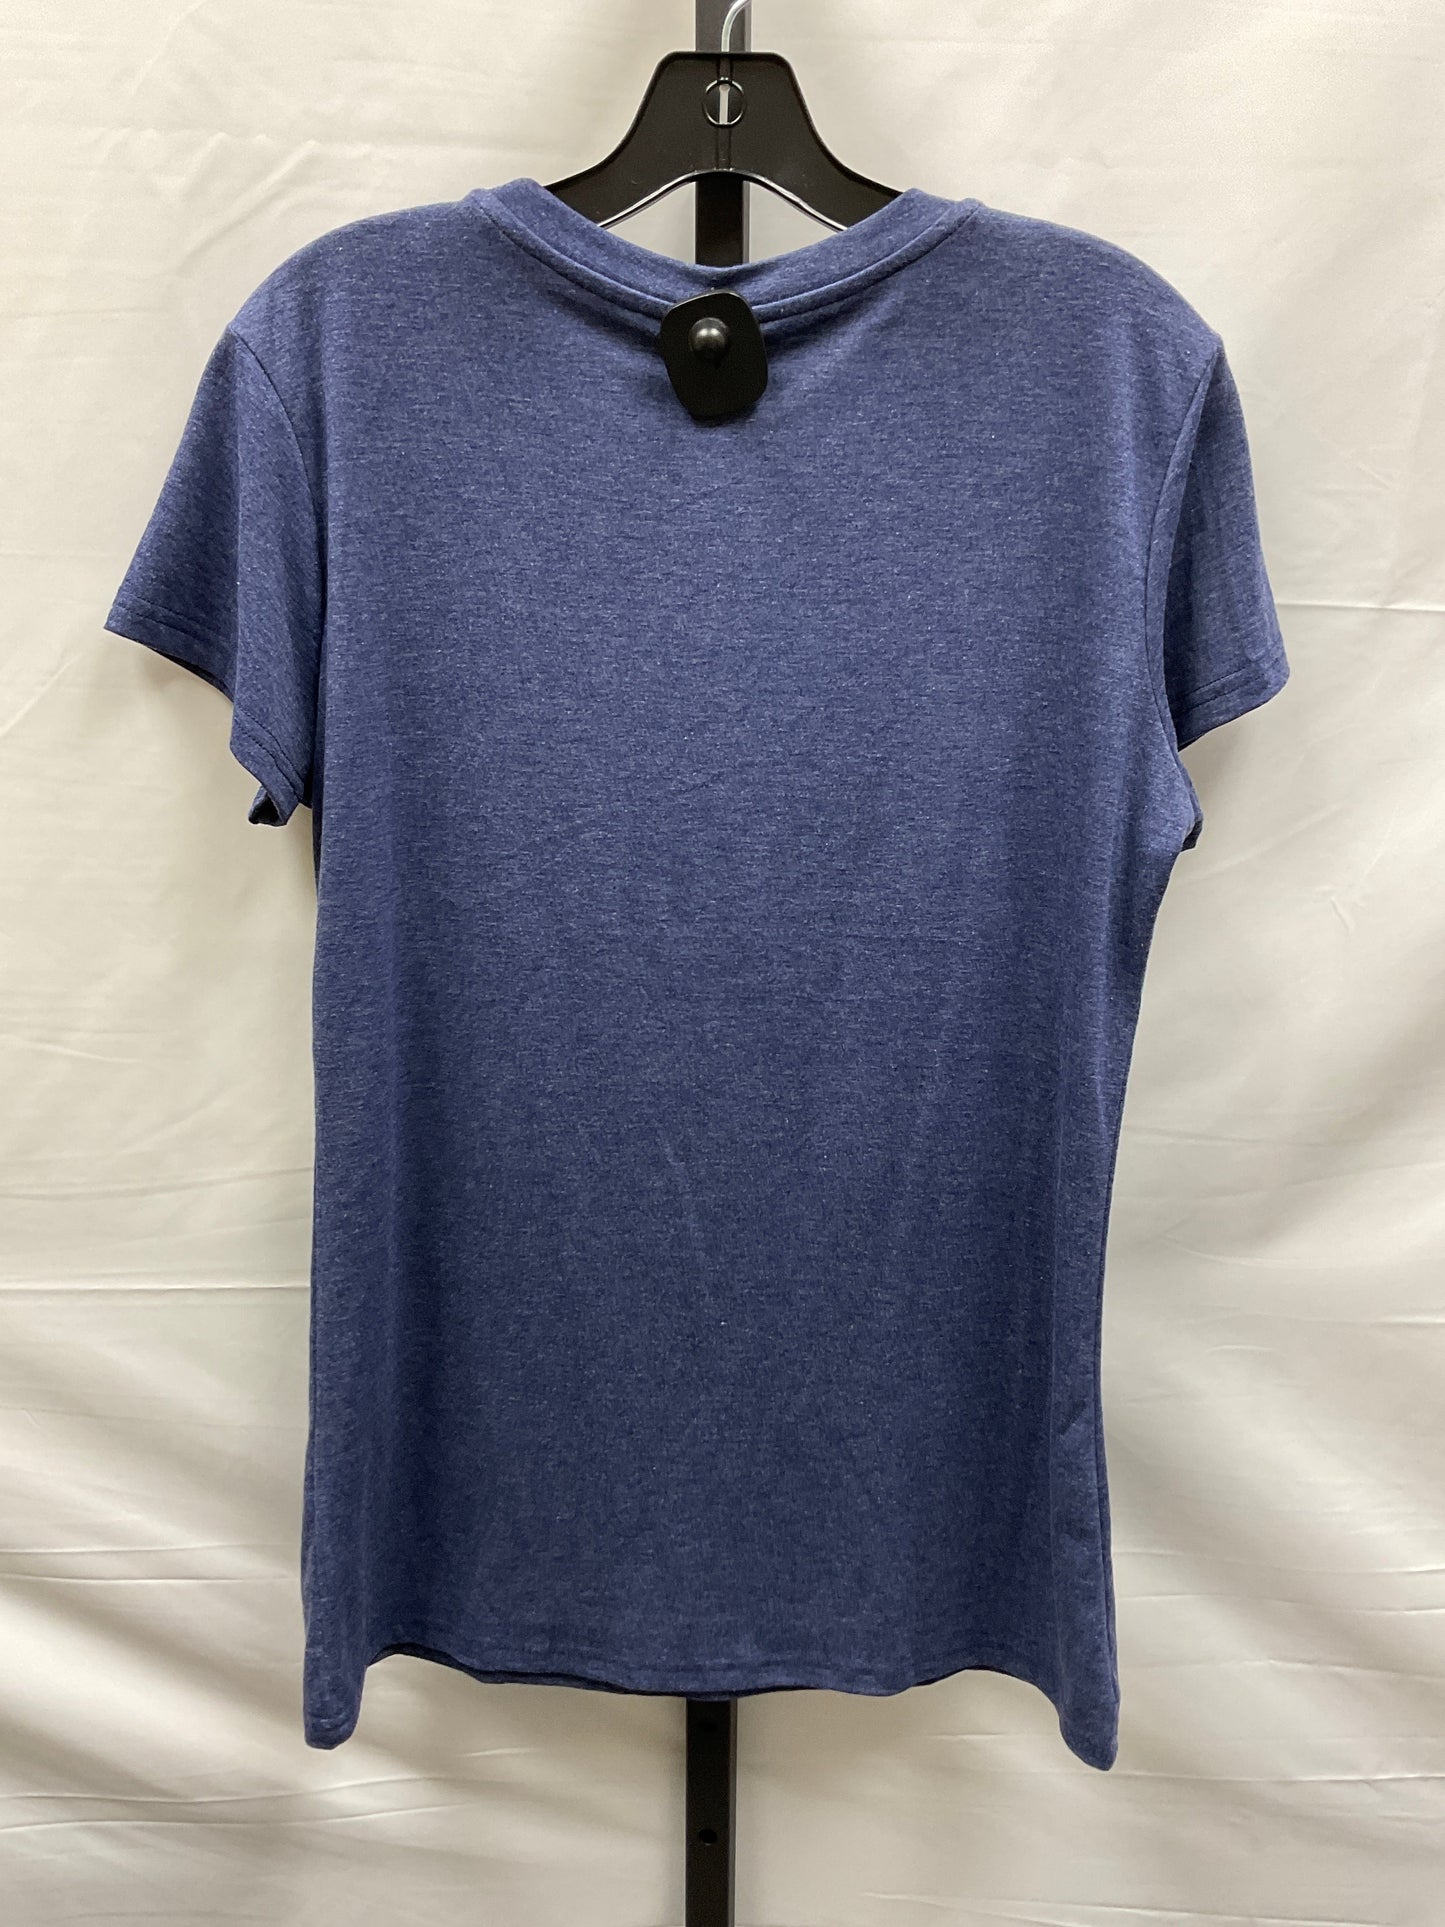 Blue Top Short Sleeve Basic Clothes Mentor, Size L